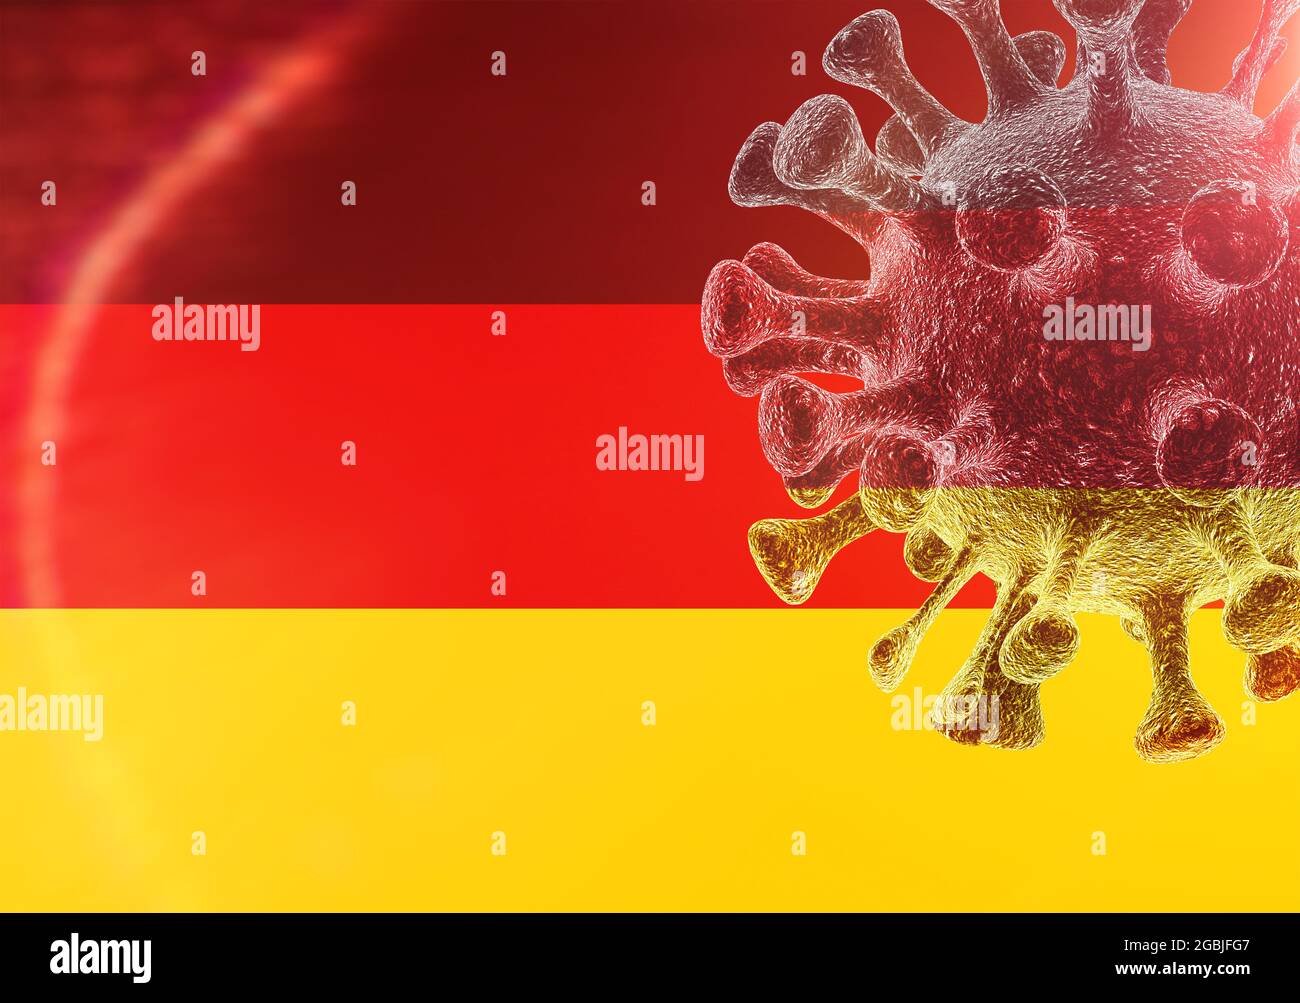 Germany Flag With Corona Virus Virus Background With 3D Created Viruses Outbreak Of The Lung Disease Covid 19 In Germany Cell Stock Photo